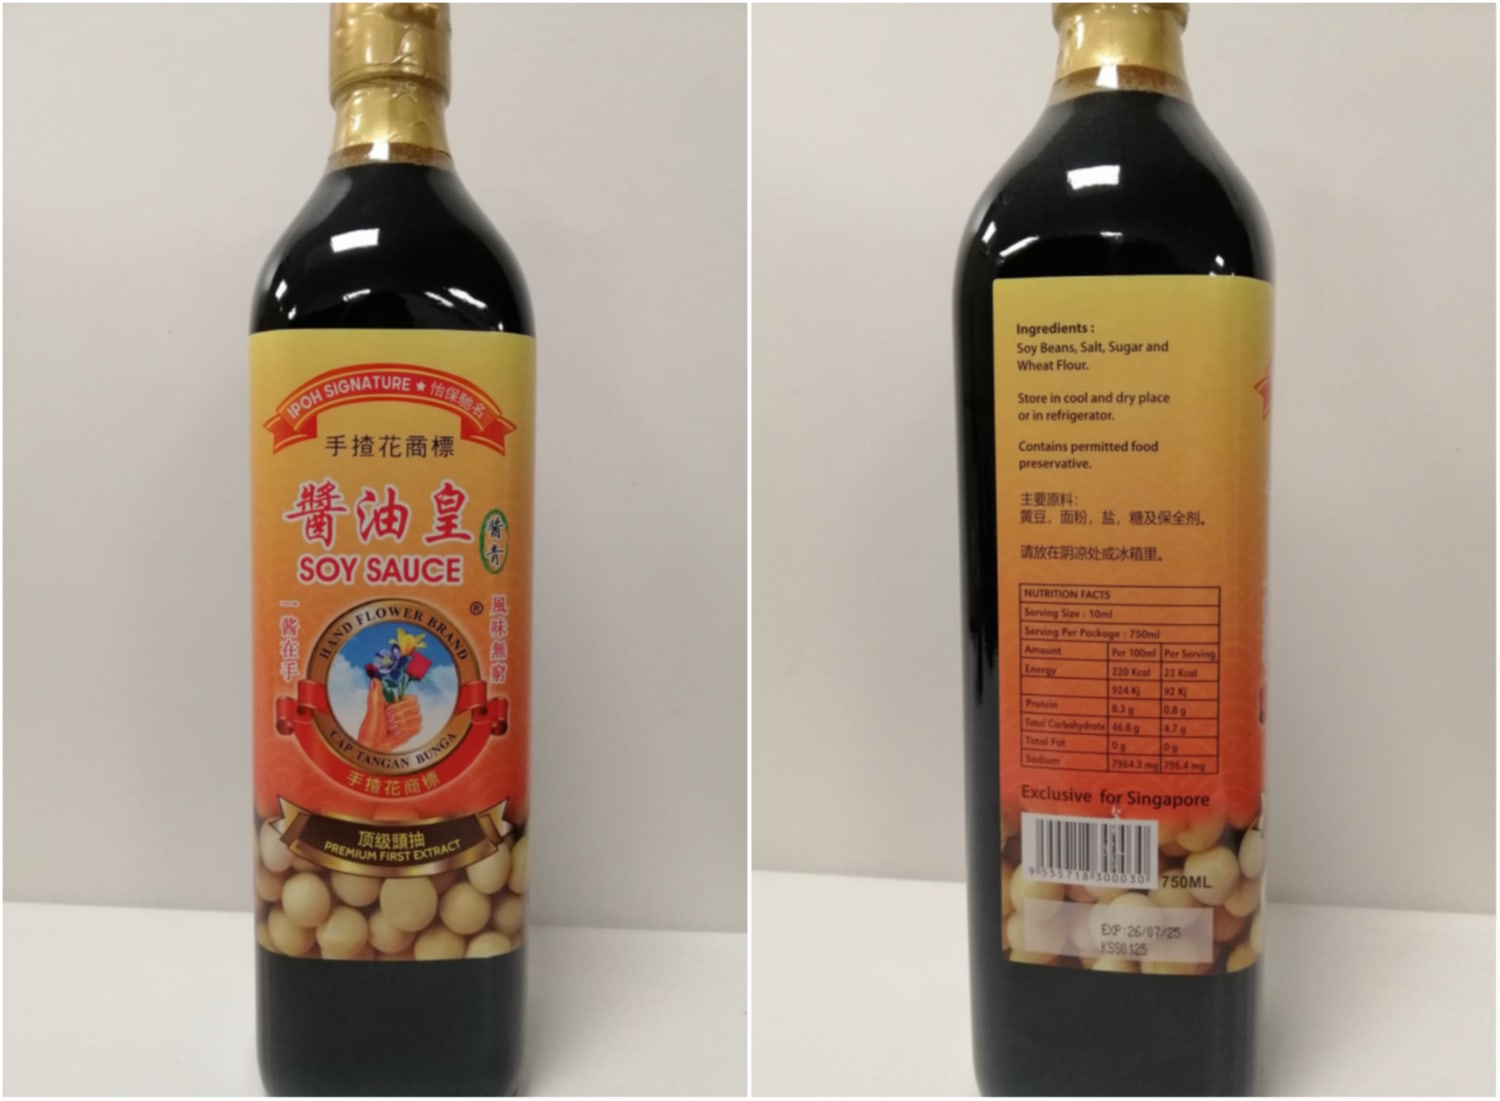 Importer Heng Yoon Trading has been ordered to recall a batch of Hand Flower Brand soy sauce (pictured) as a precautionary measure.